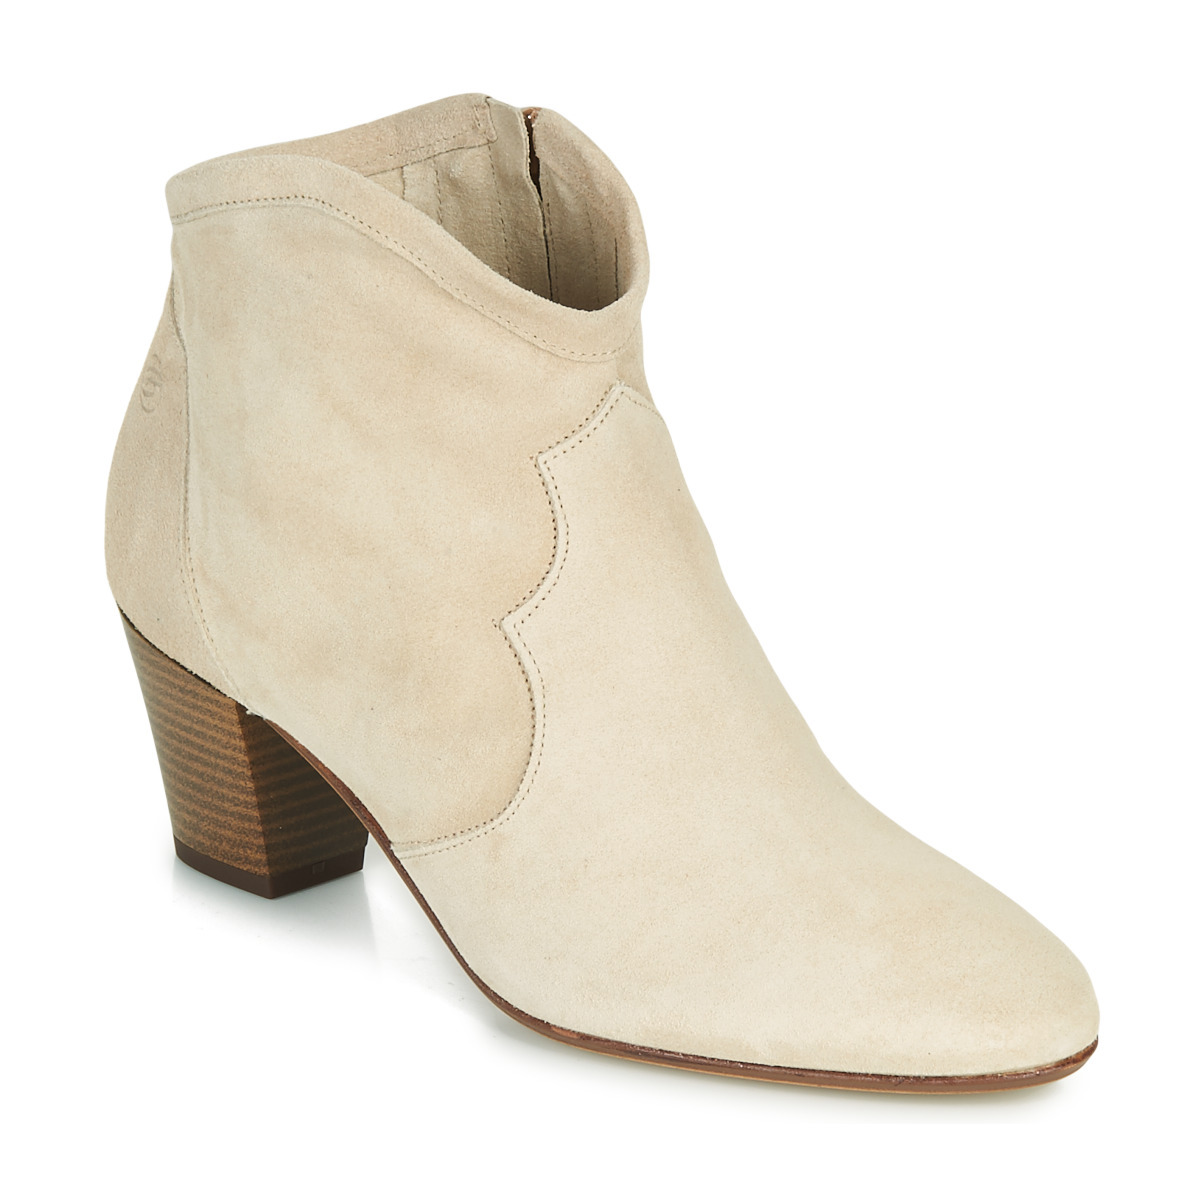 Woman Ankle Boots - Beige - Betty London - Spartoo GOOFASH